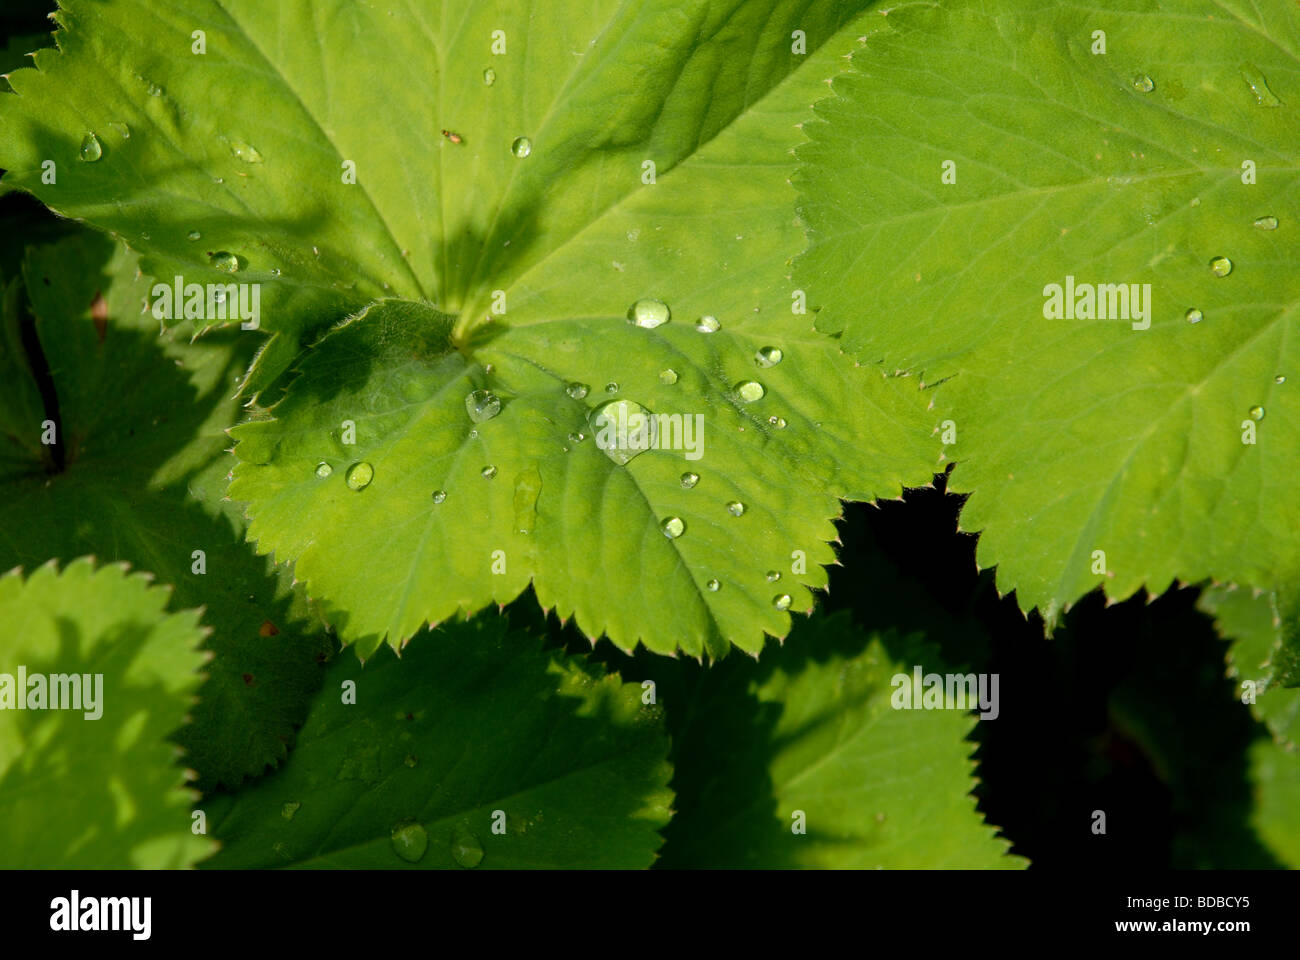 raindrops on some leaves of a garden Ladys Mantle or Alchemilla Mollis Stock Photo